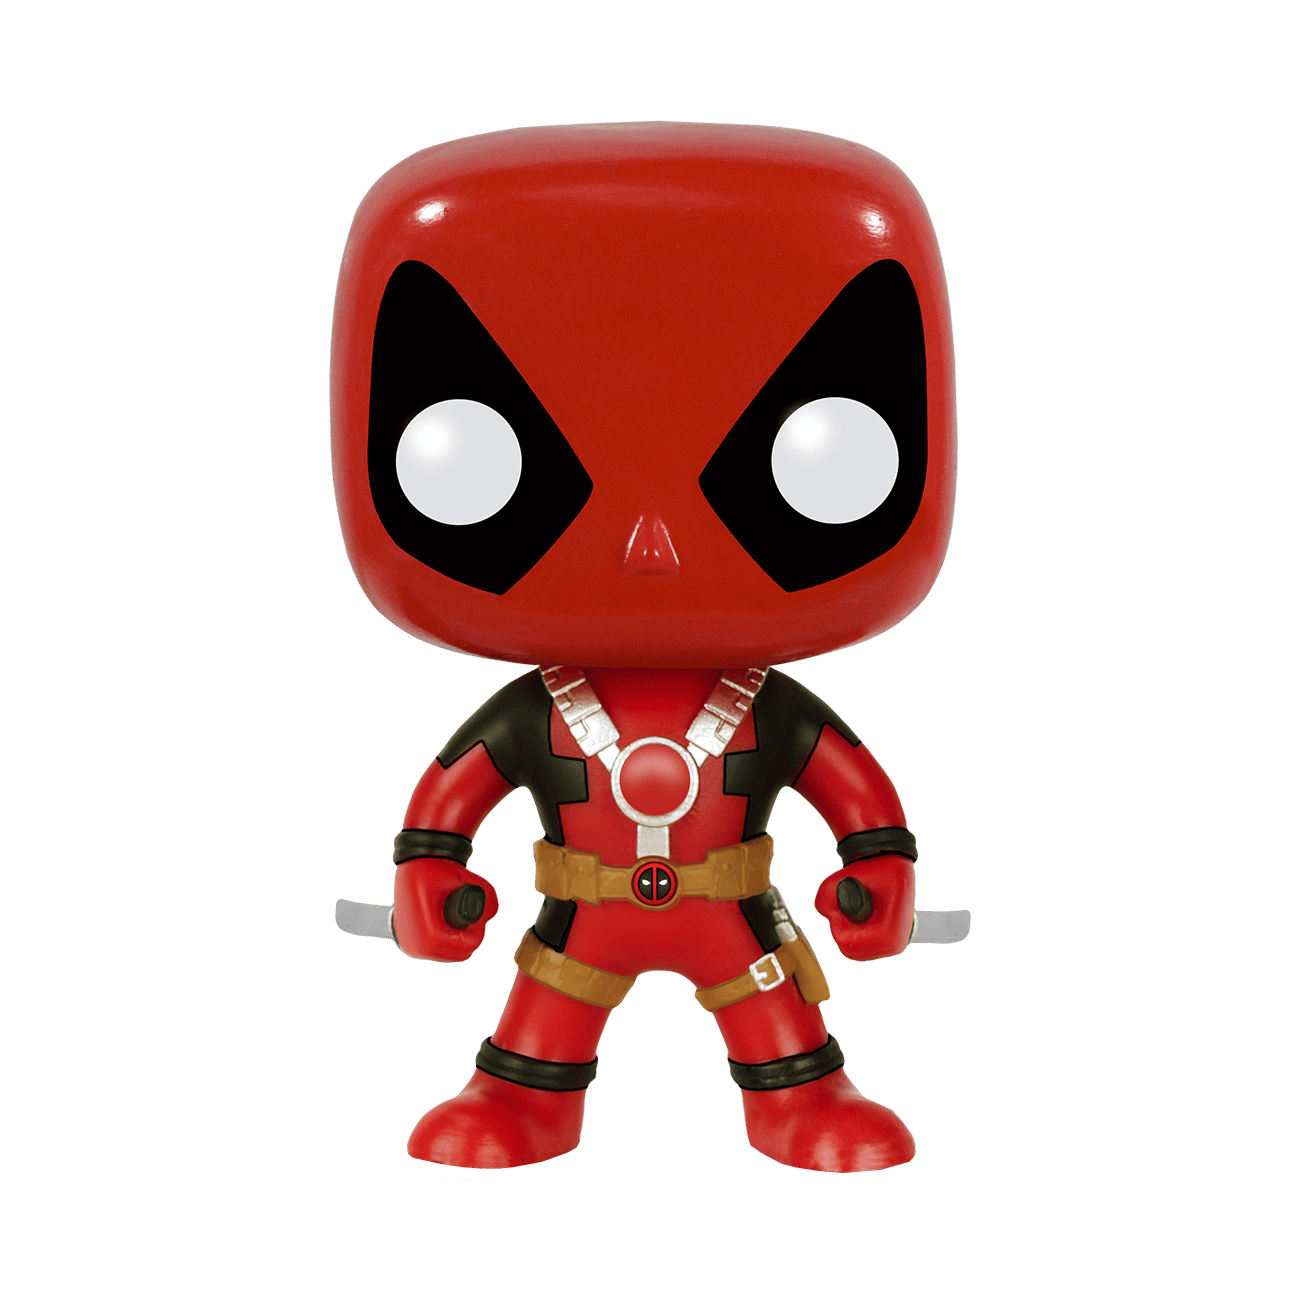 lade stok warm Buy Pop! Deadpool with Two Swords at Funko.